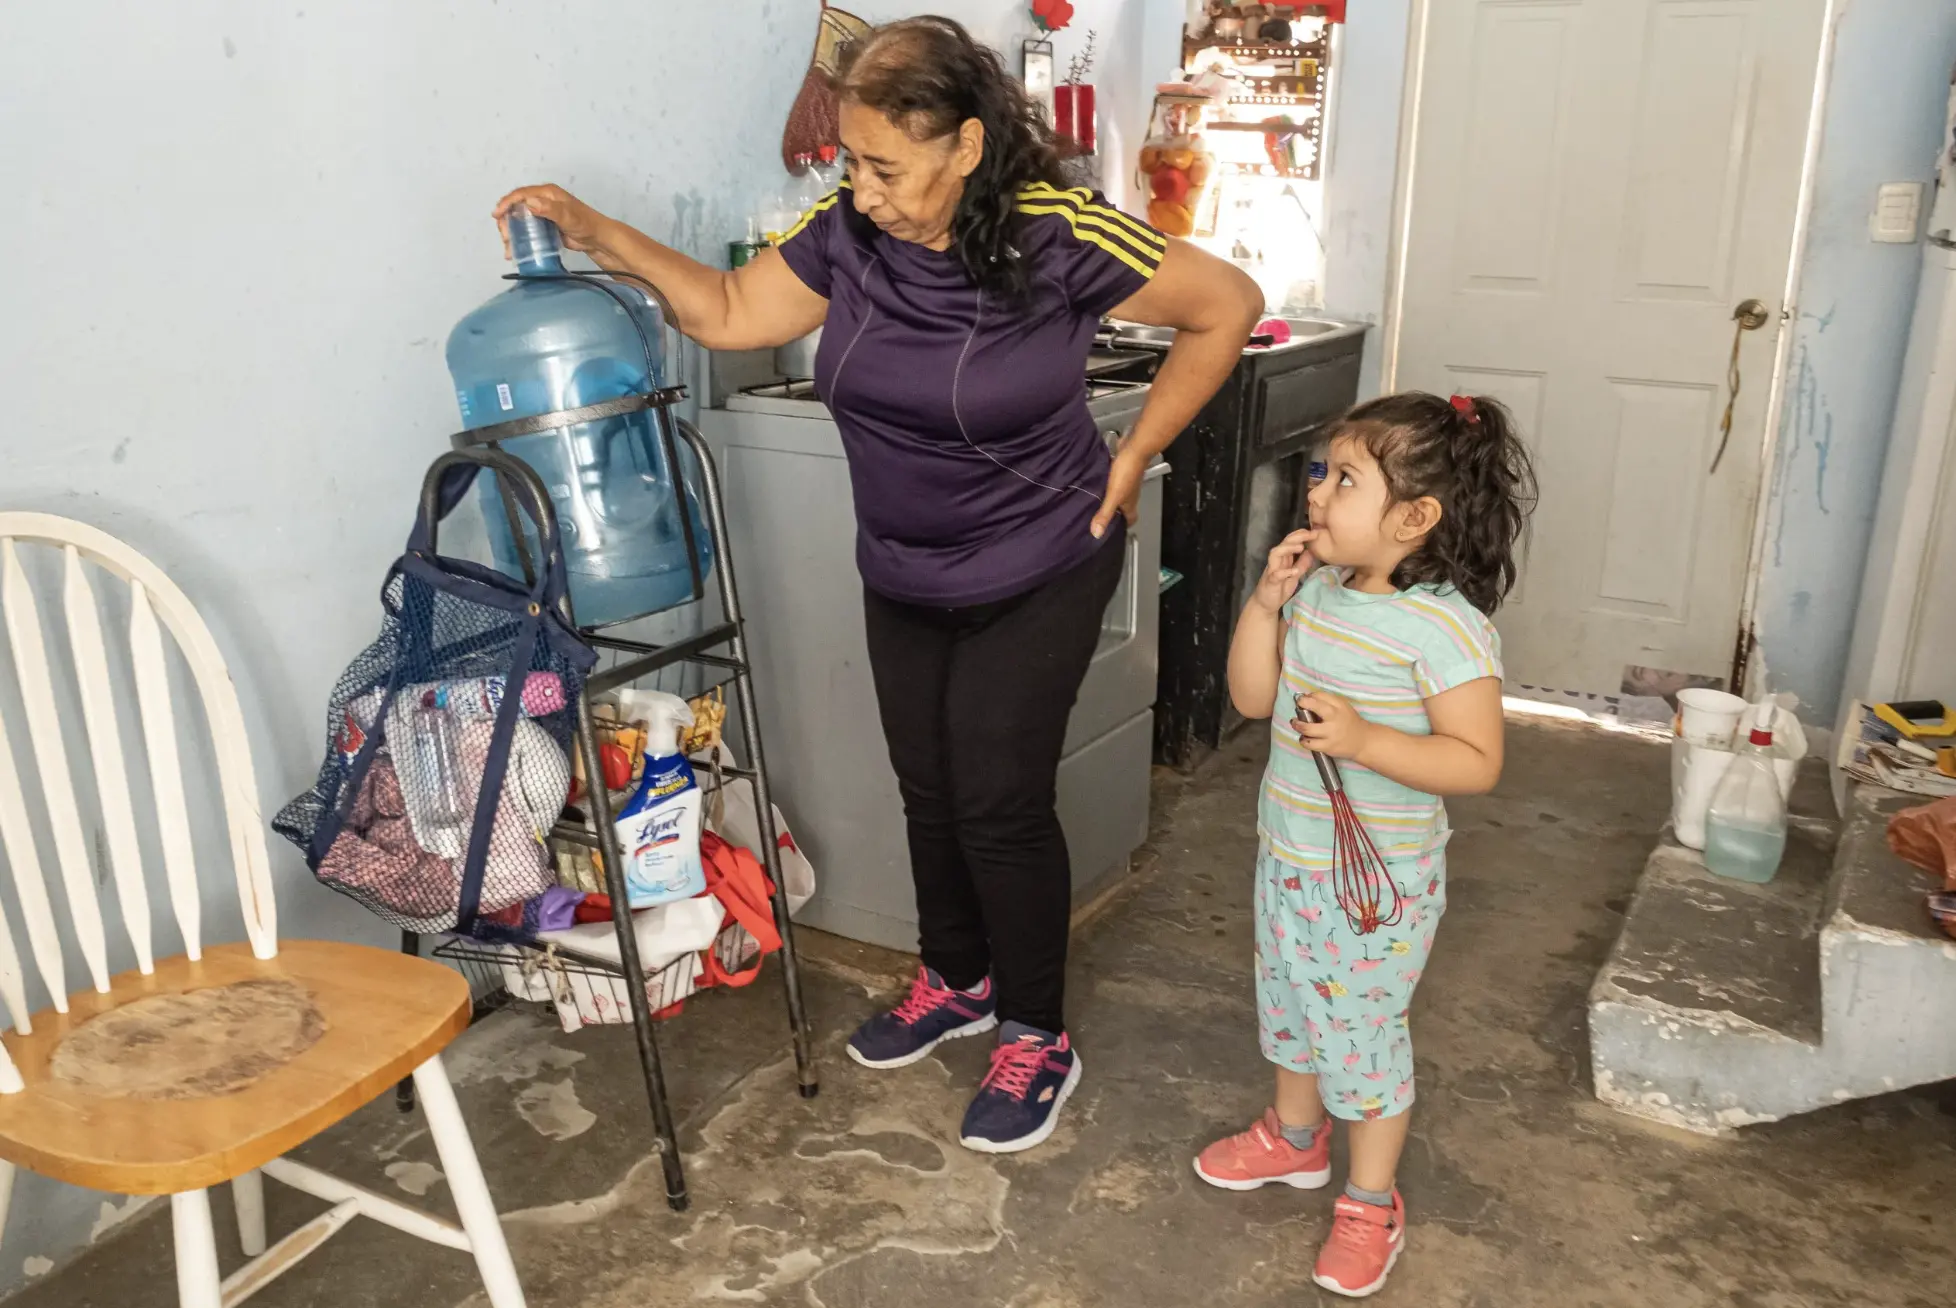 A grandmother stands with granddaughter next to a water jug